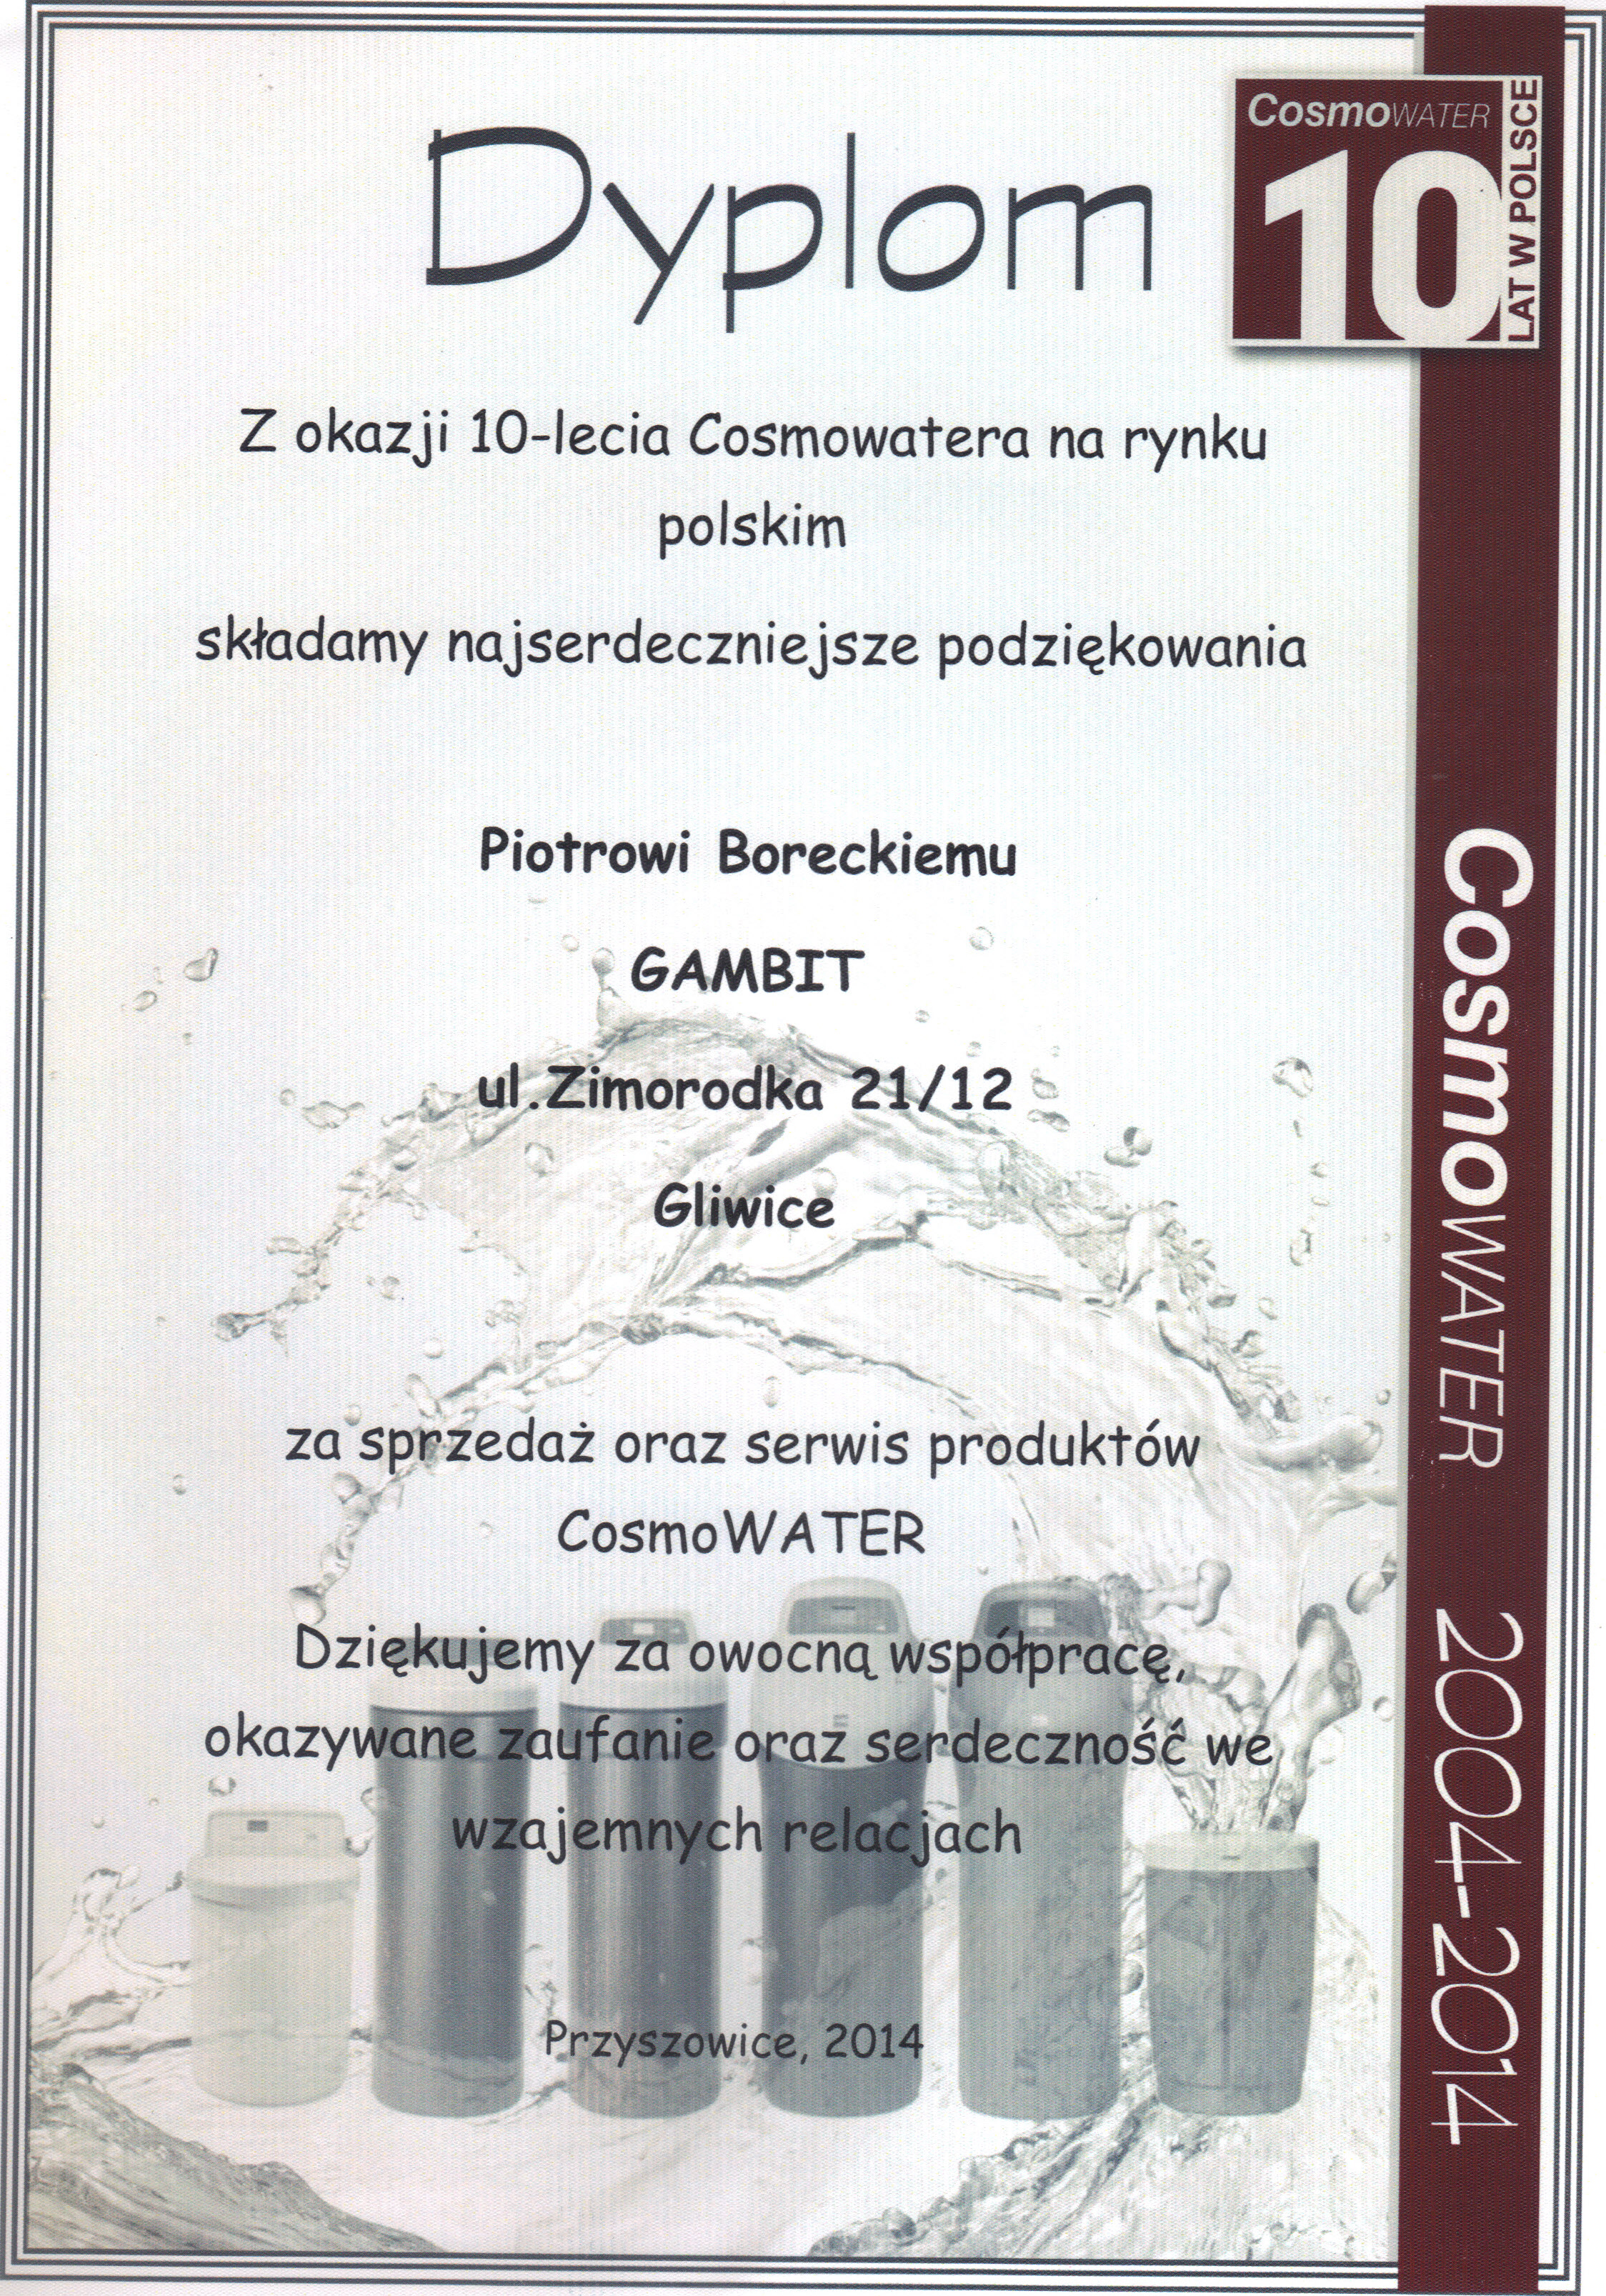 COSMOWATER